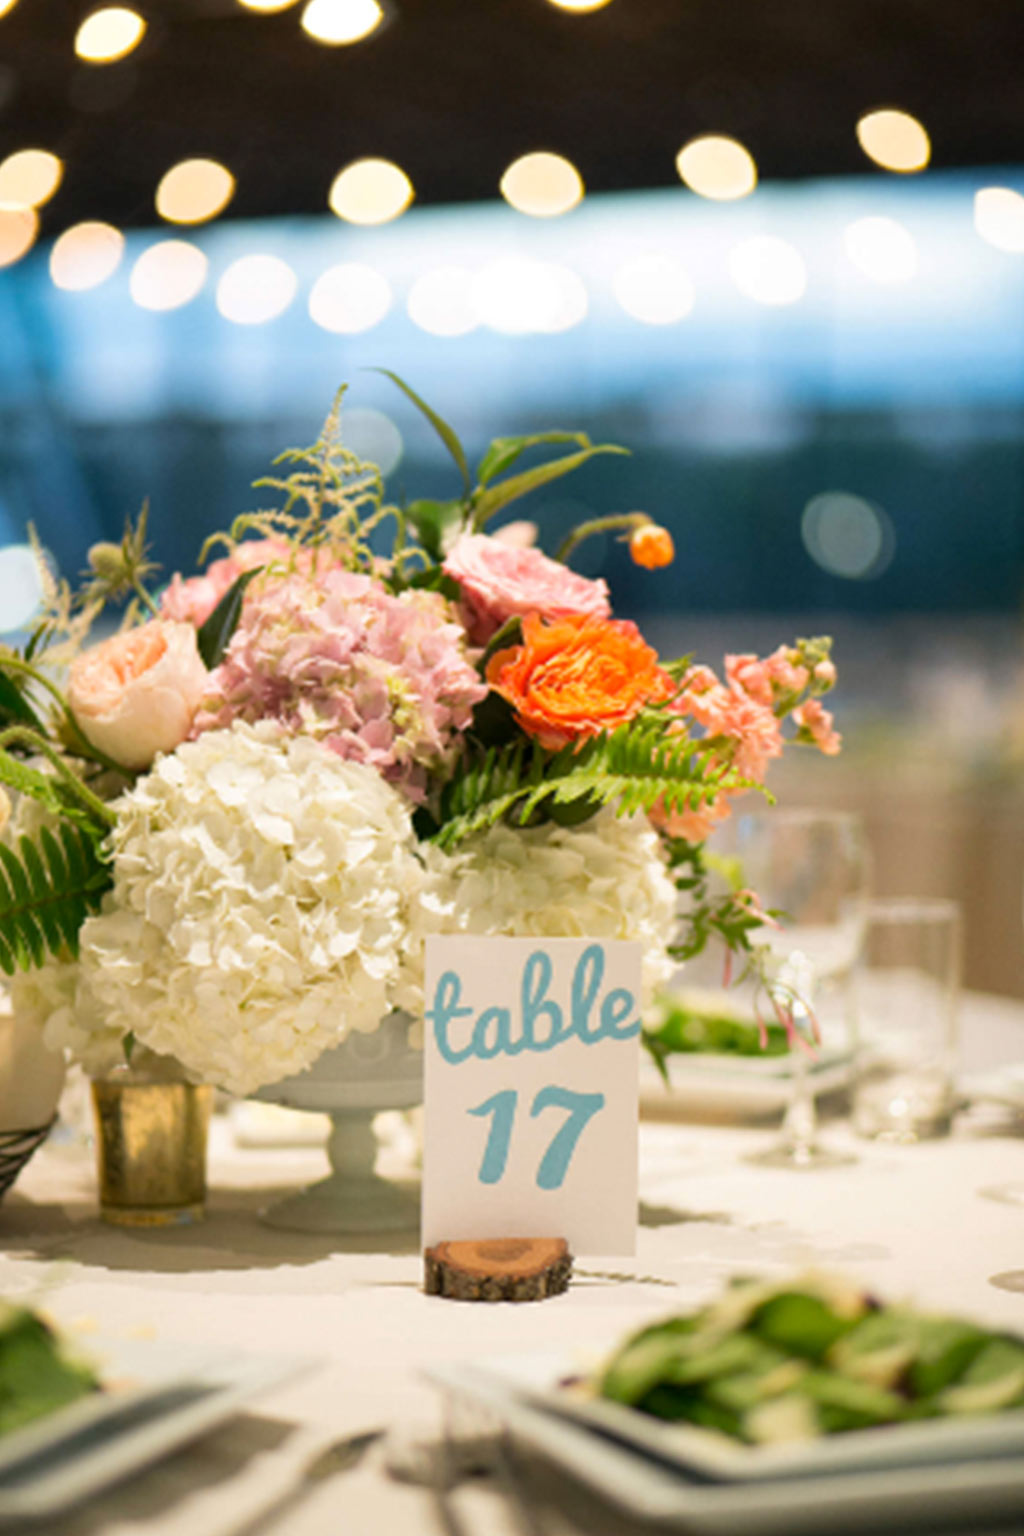 Blue calligraphy table number with low wedding centerpiece